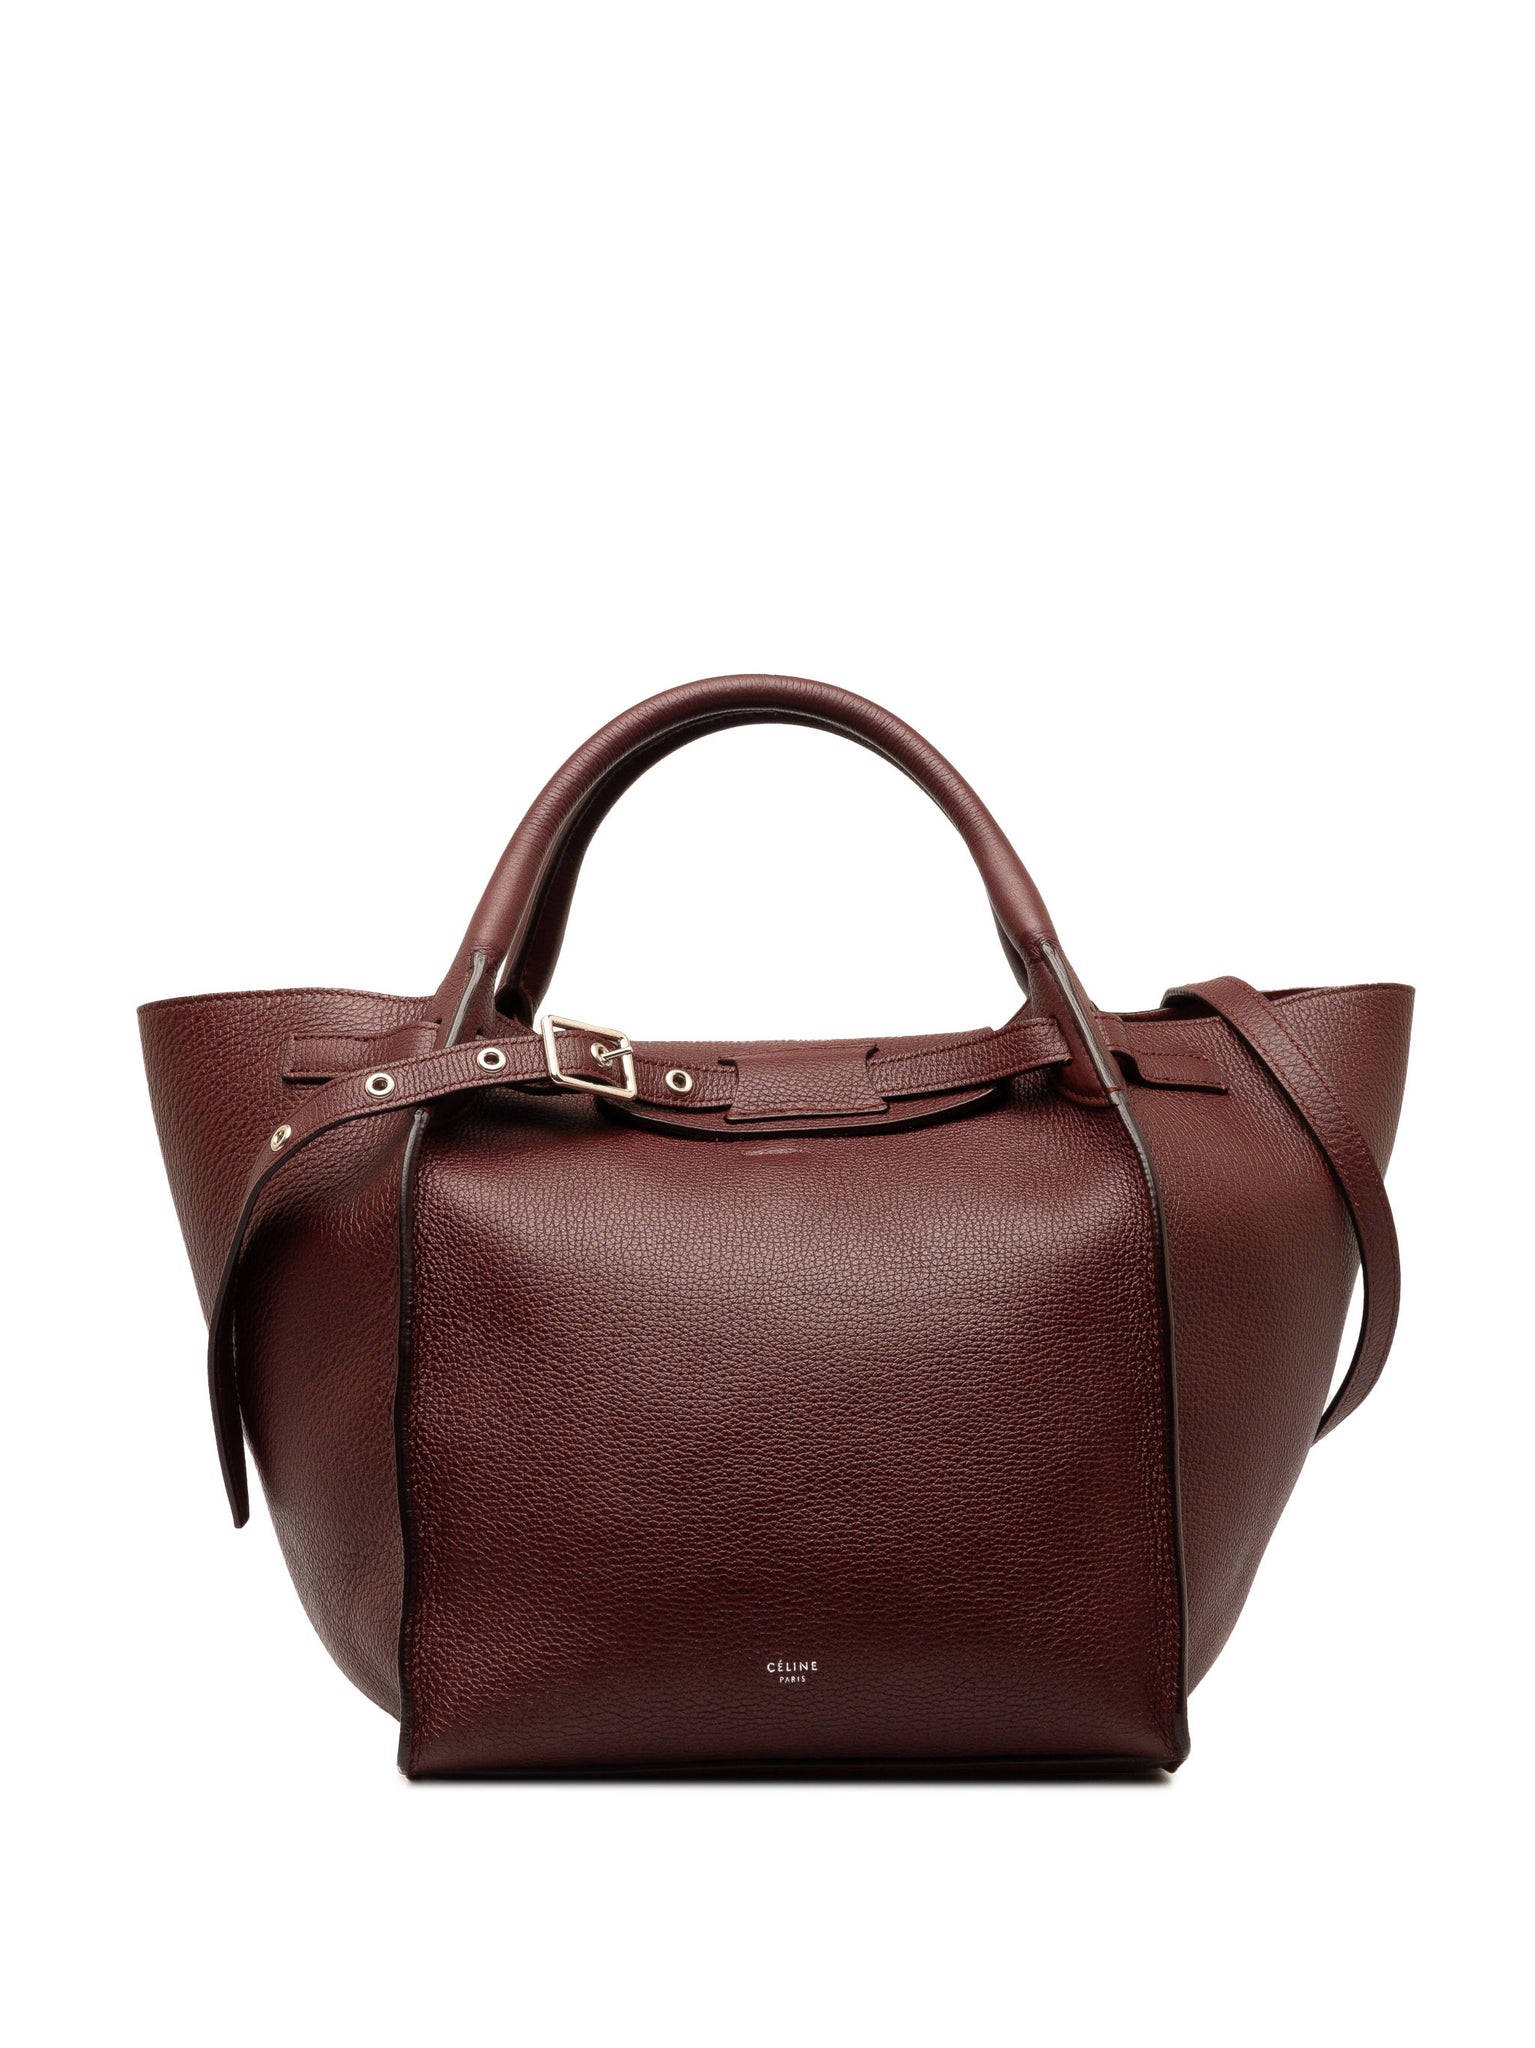 Celine Big Bag Small Red Leather